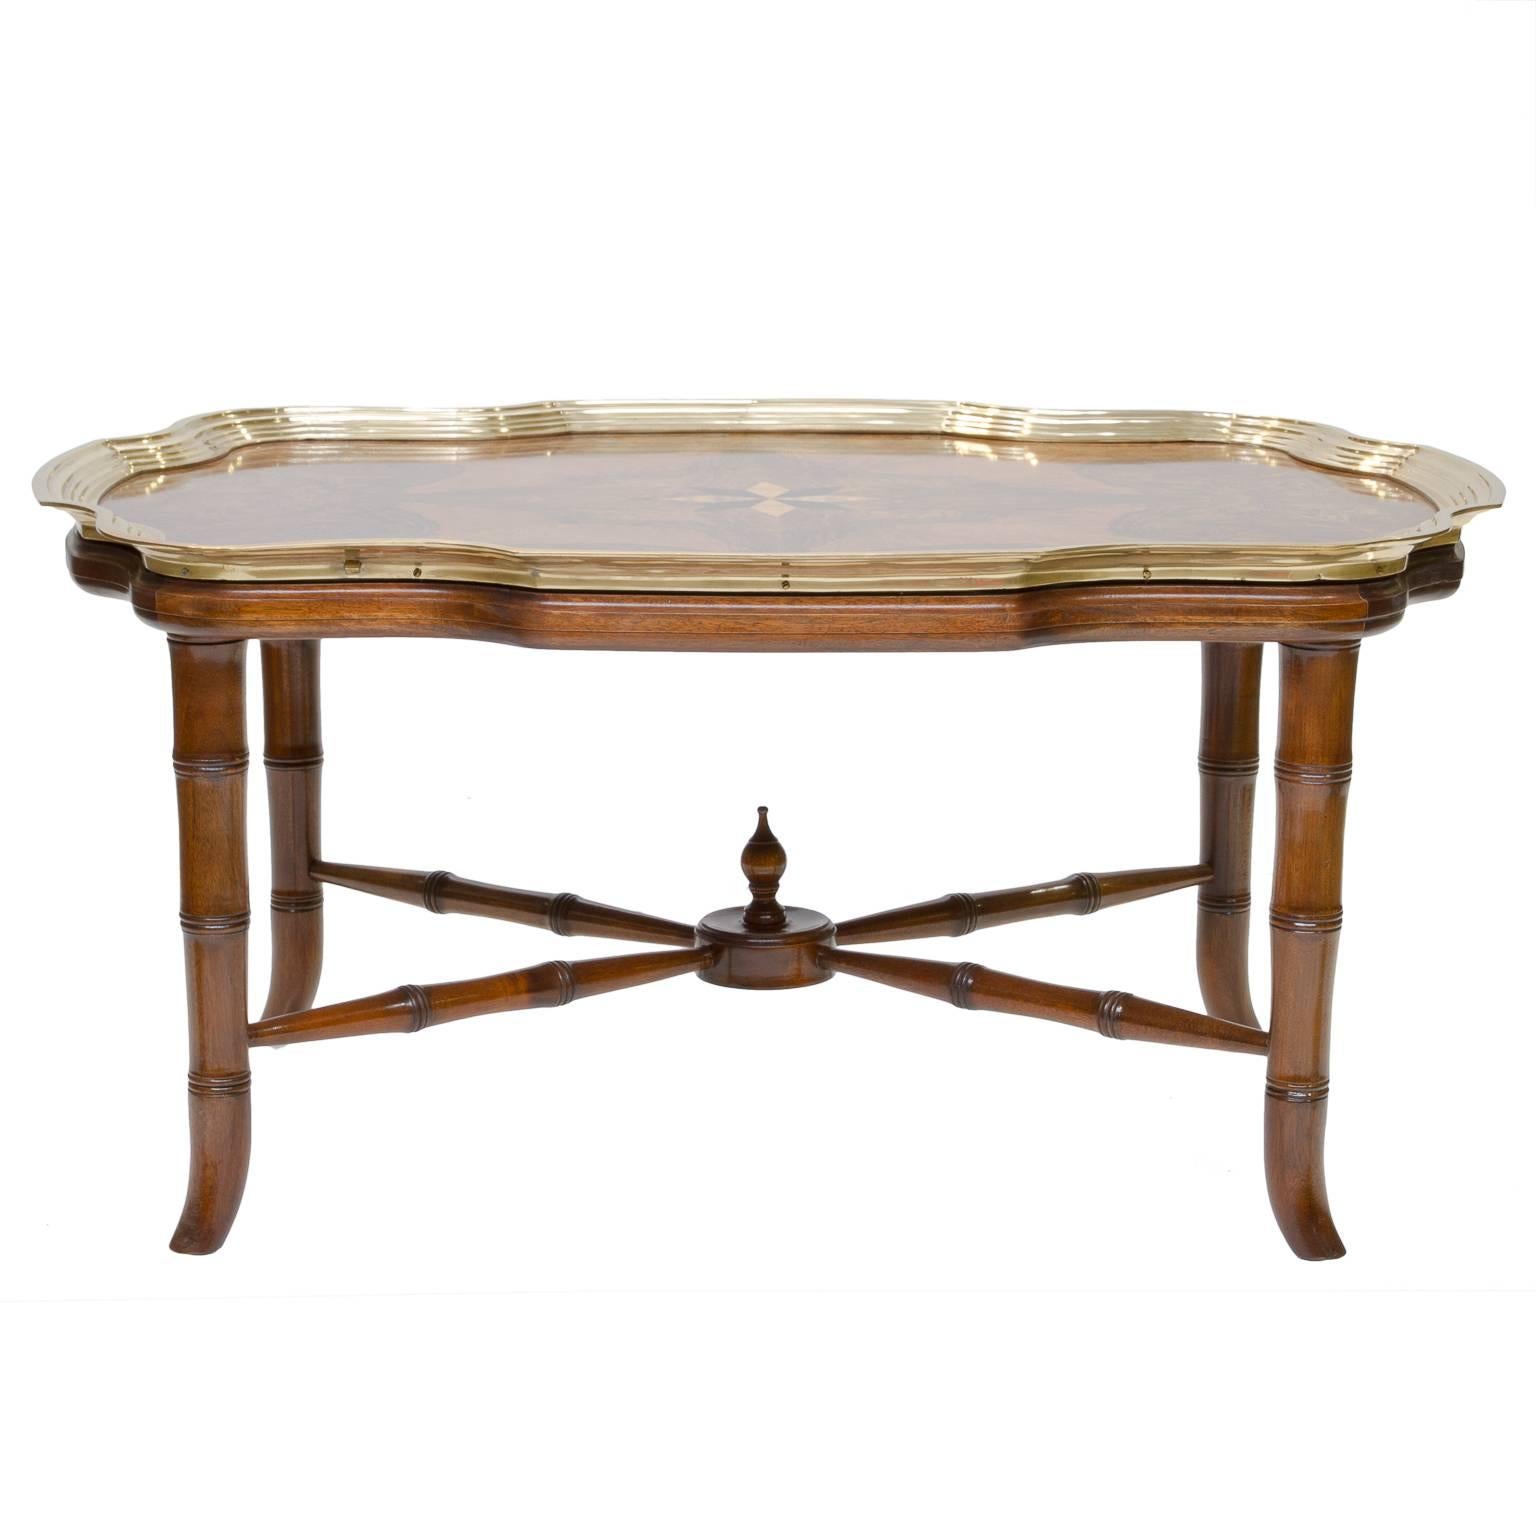 An impressive coffee table which is large in scale vs an usual tray table. This table has a stunning veneered top with an inlaid starburst. There is a shaped top and the brass edging mimics the shape. The base was made for the top. Solid mahogany